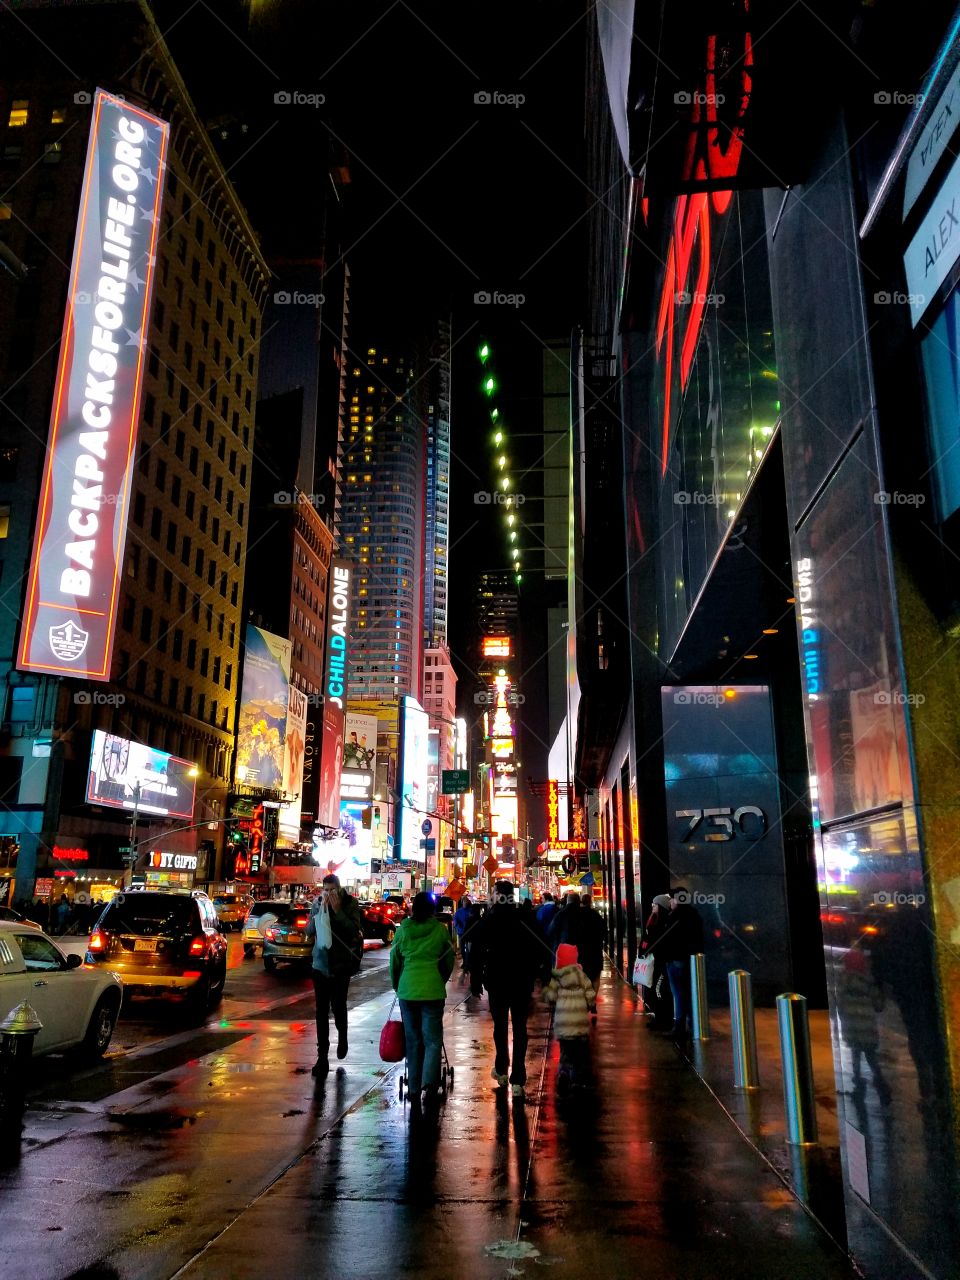 Rainy night in Time Square NYC